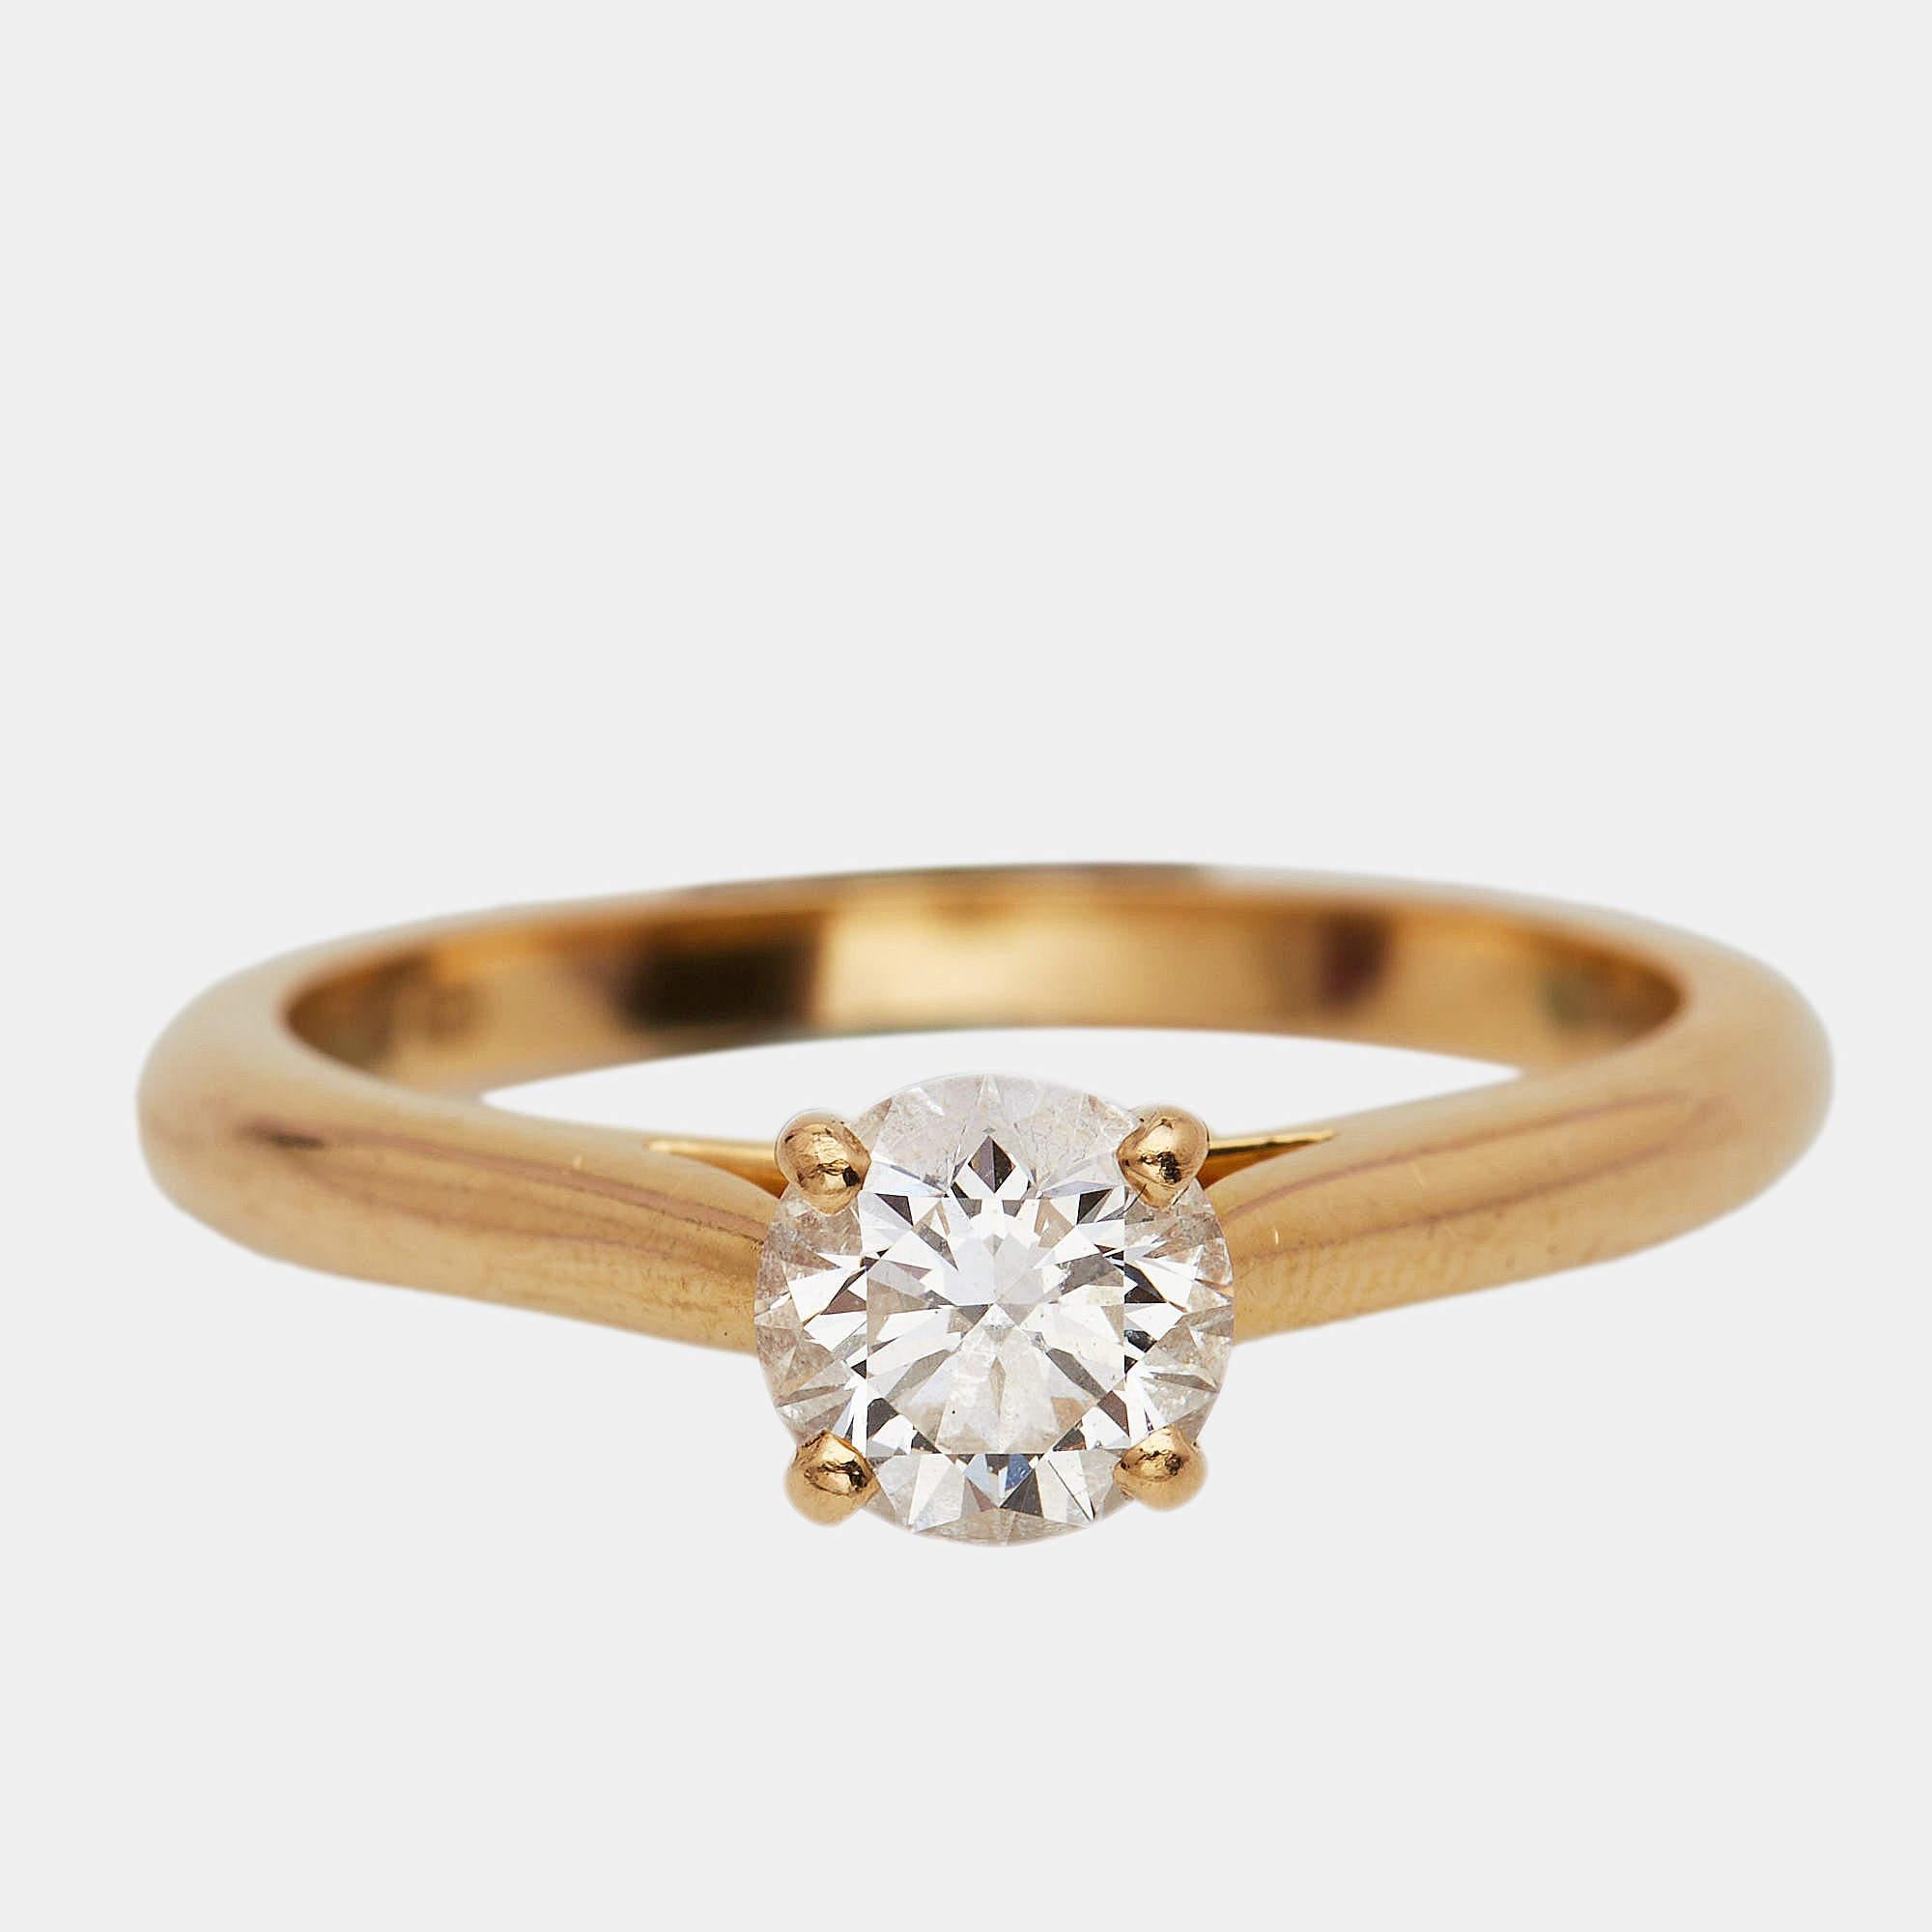 Keep it classic and exquisite with this gorgeous Cartier ring. Crafted in 18k yellow gold and set with a brilliant solitaire, this ring boasts of excellent distinctiveness and artisanship. This captivating ring is a true testament to true and